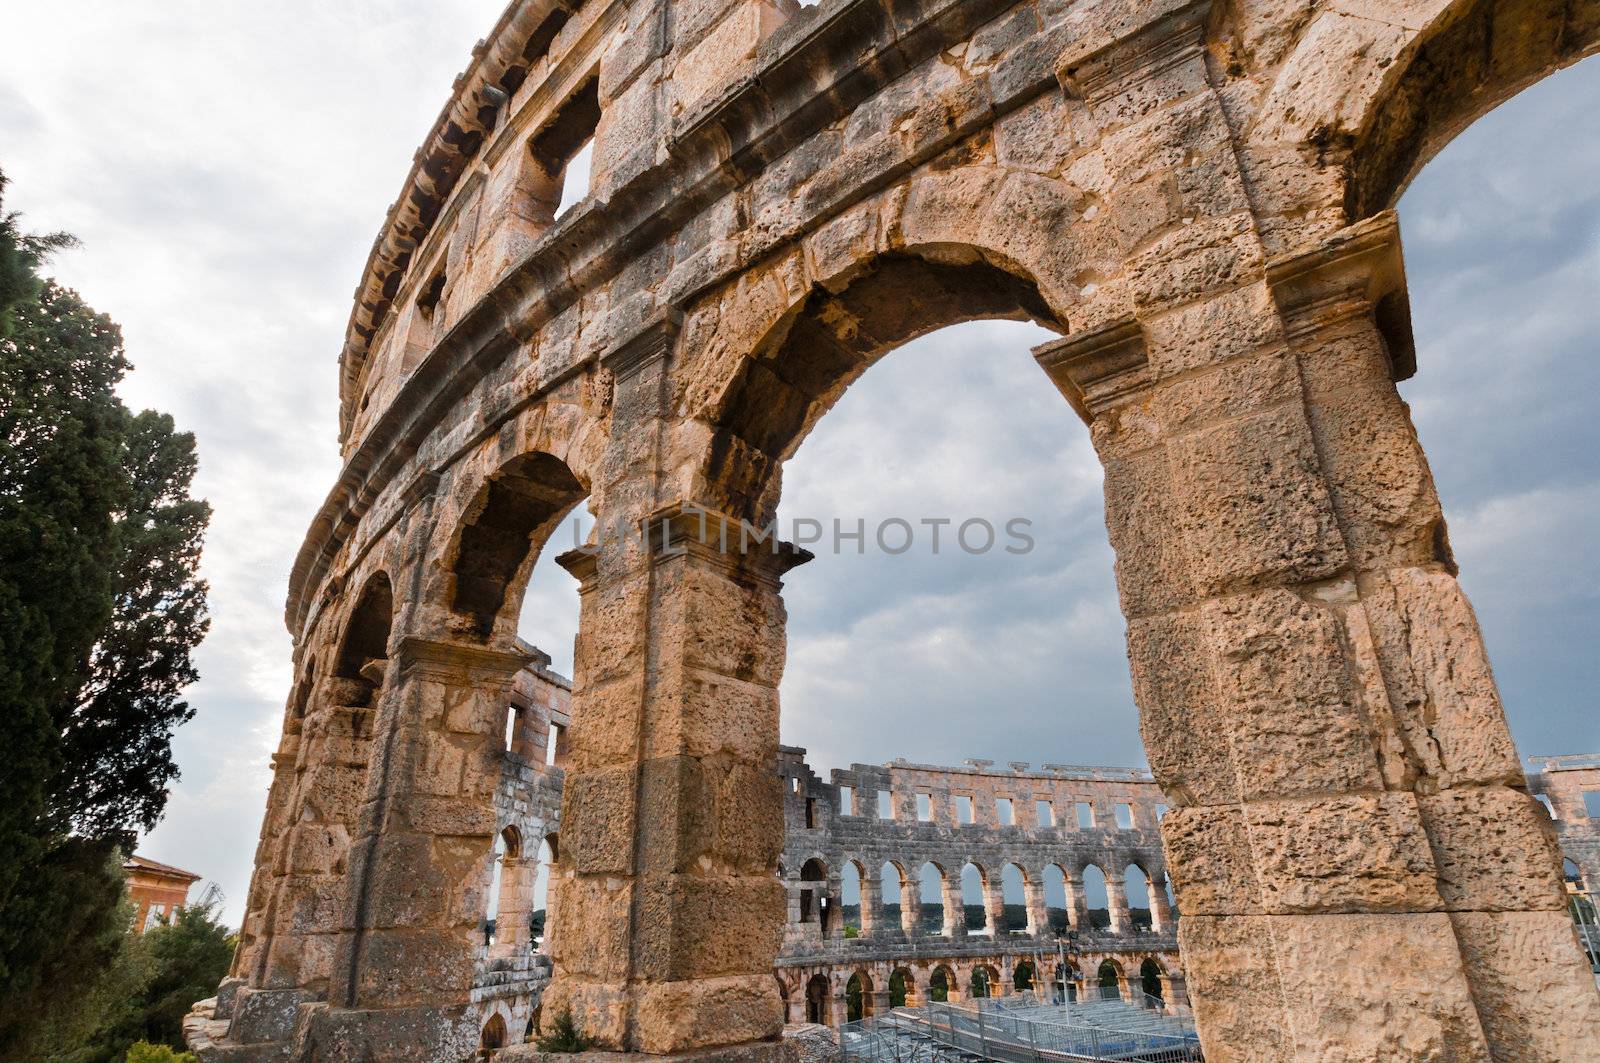 View of the Roman amphitheatre (Arena) in Pula by weltreisendertj